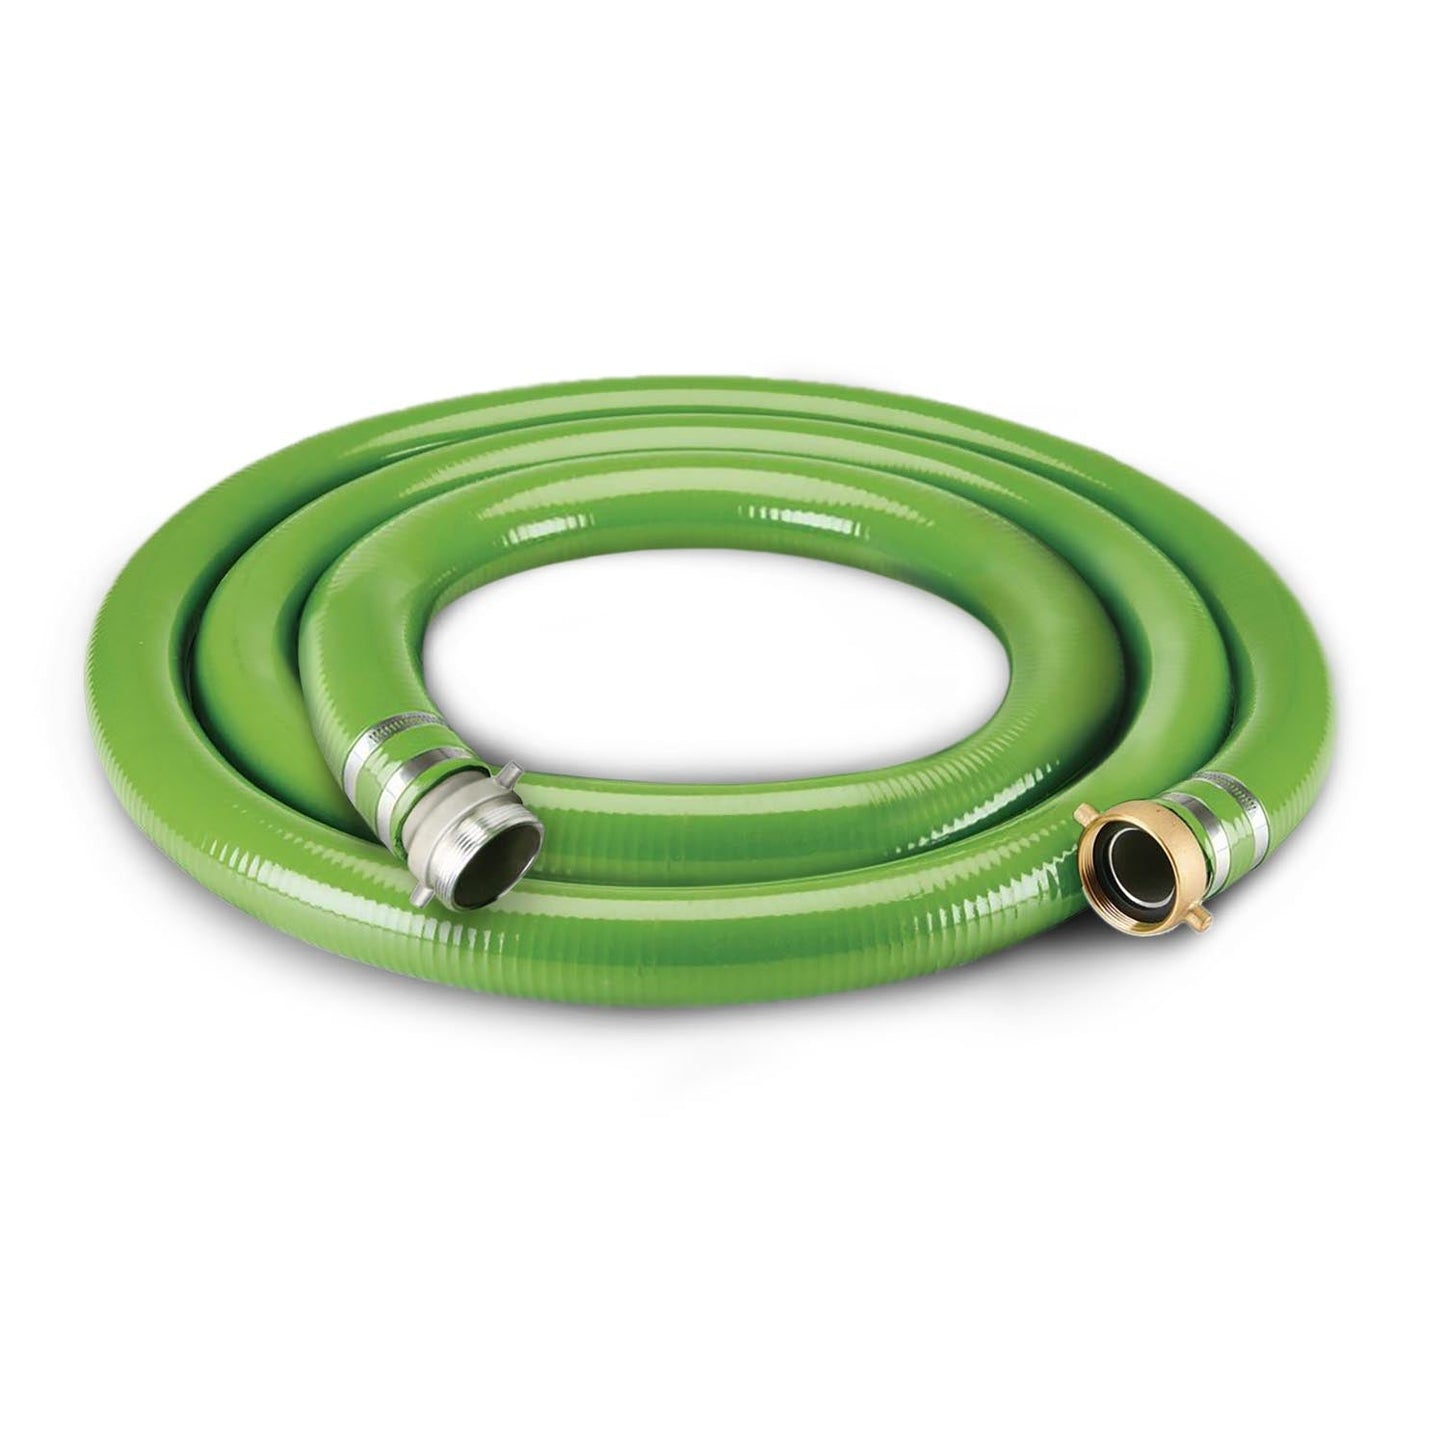 Foresee PVC 10 FT Suction Hose with Pin Lug Couplings